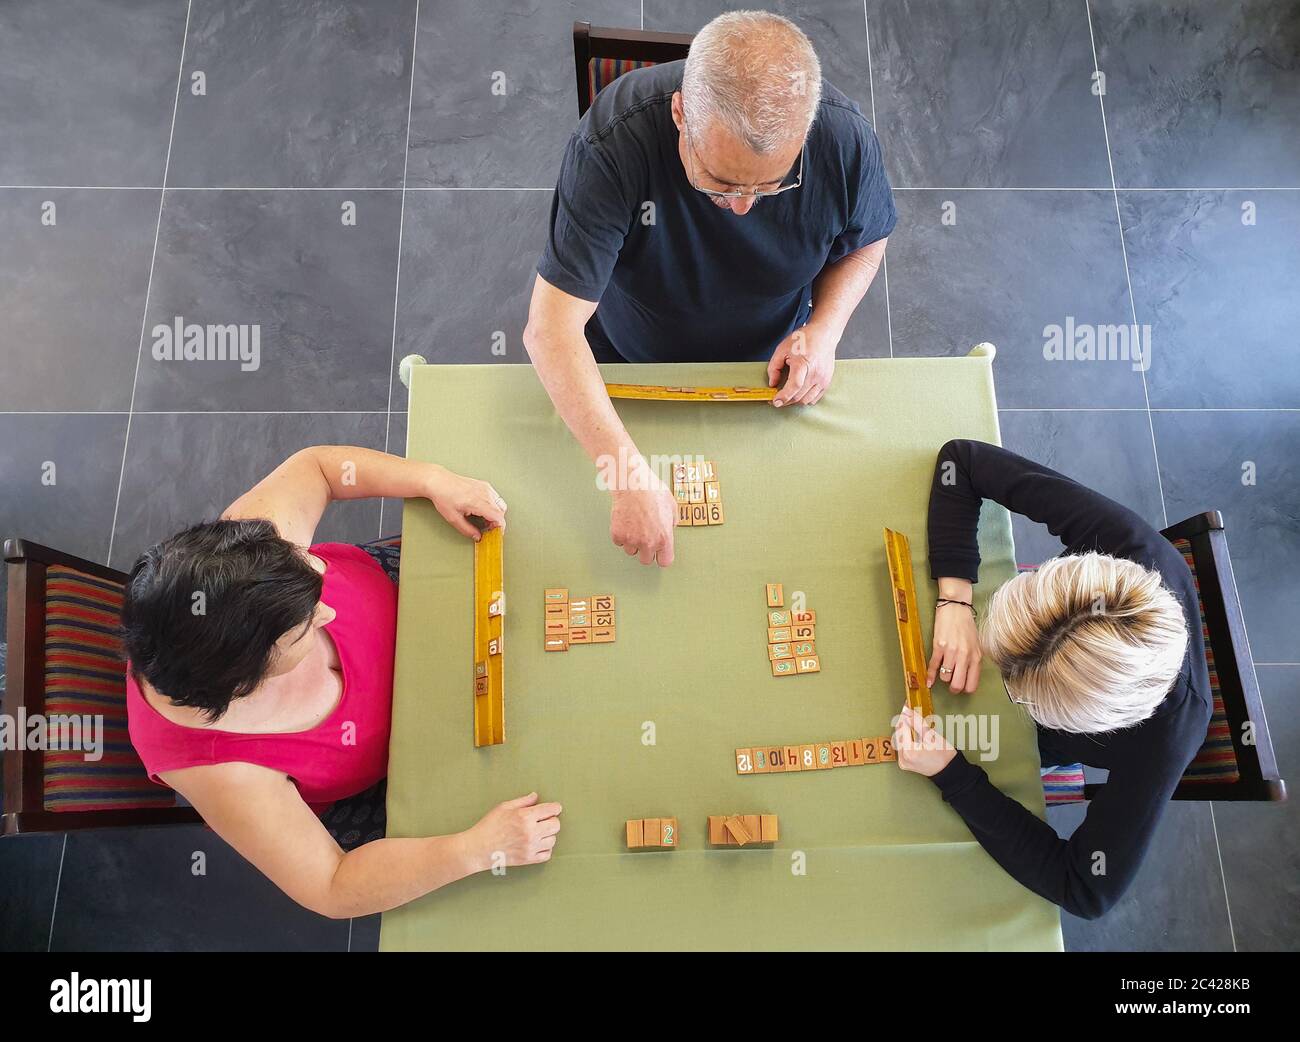 Family of three playing rummy game on table inside. Indoor home isolation activity, as social distancing quarantine measures restrict going outside du Stock Photo